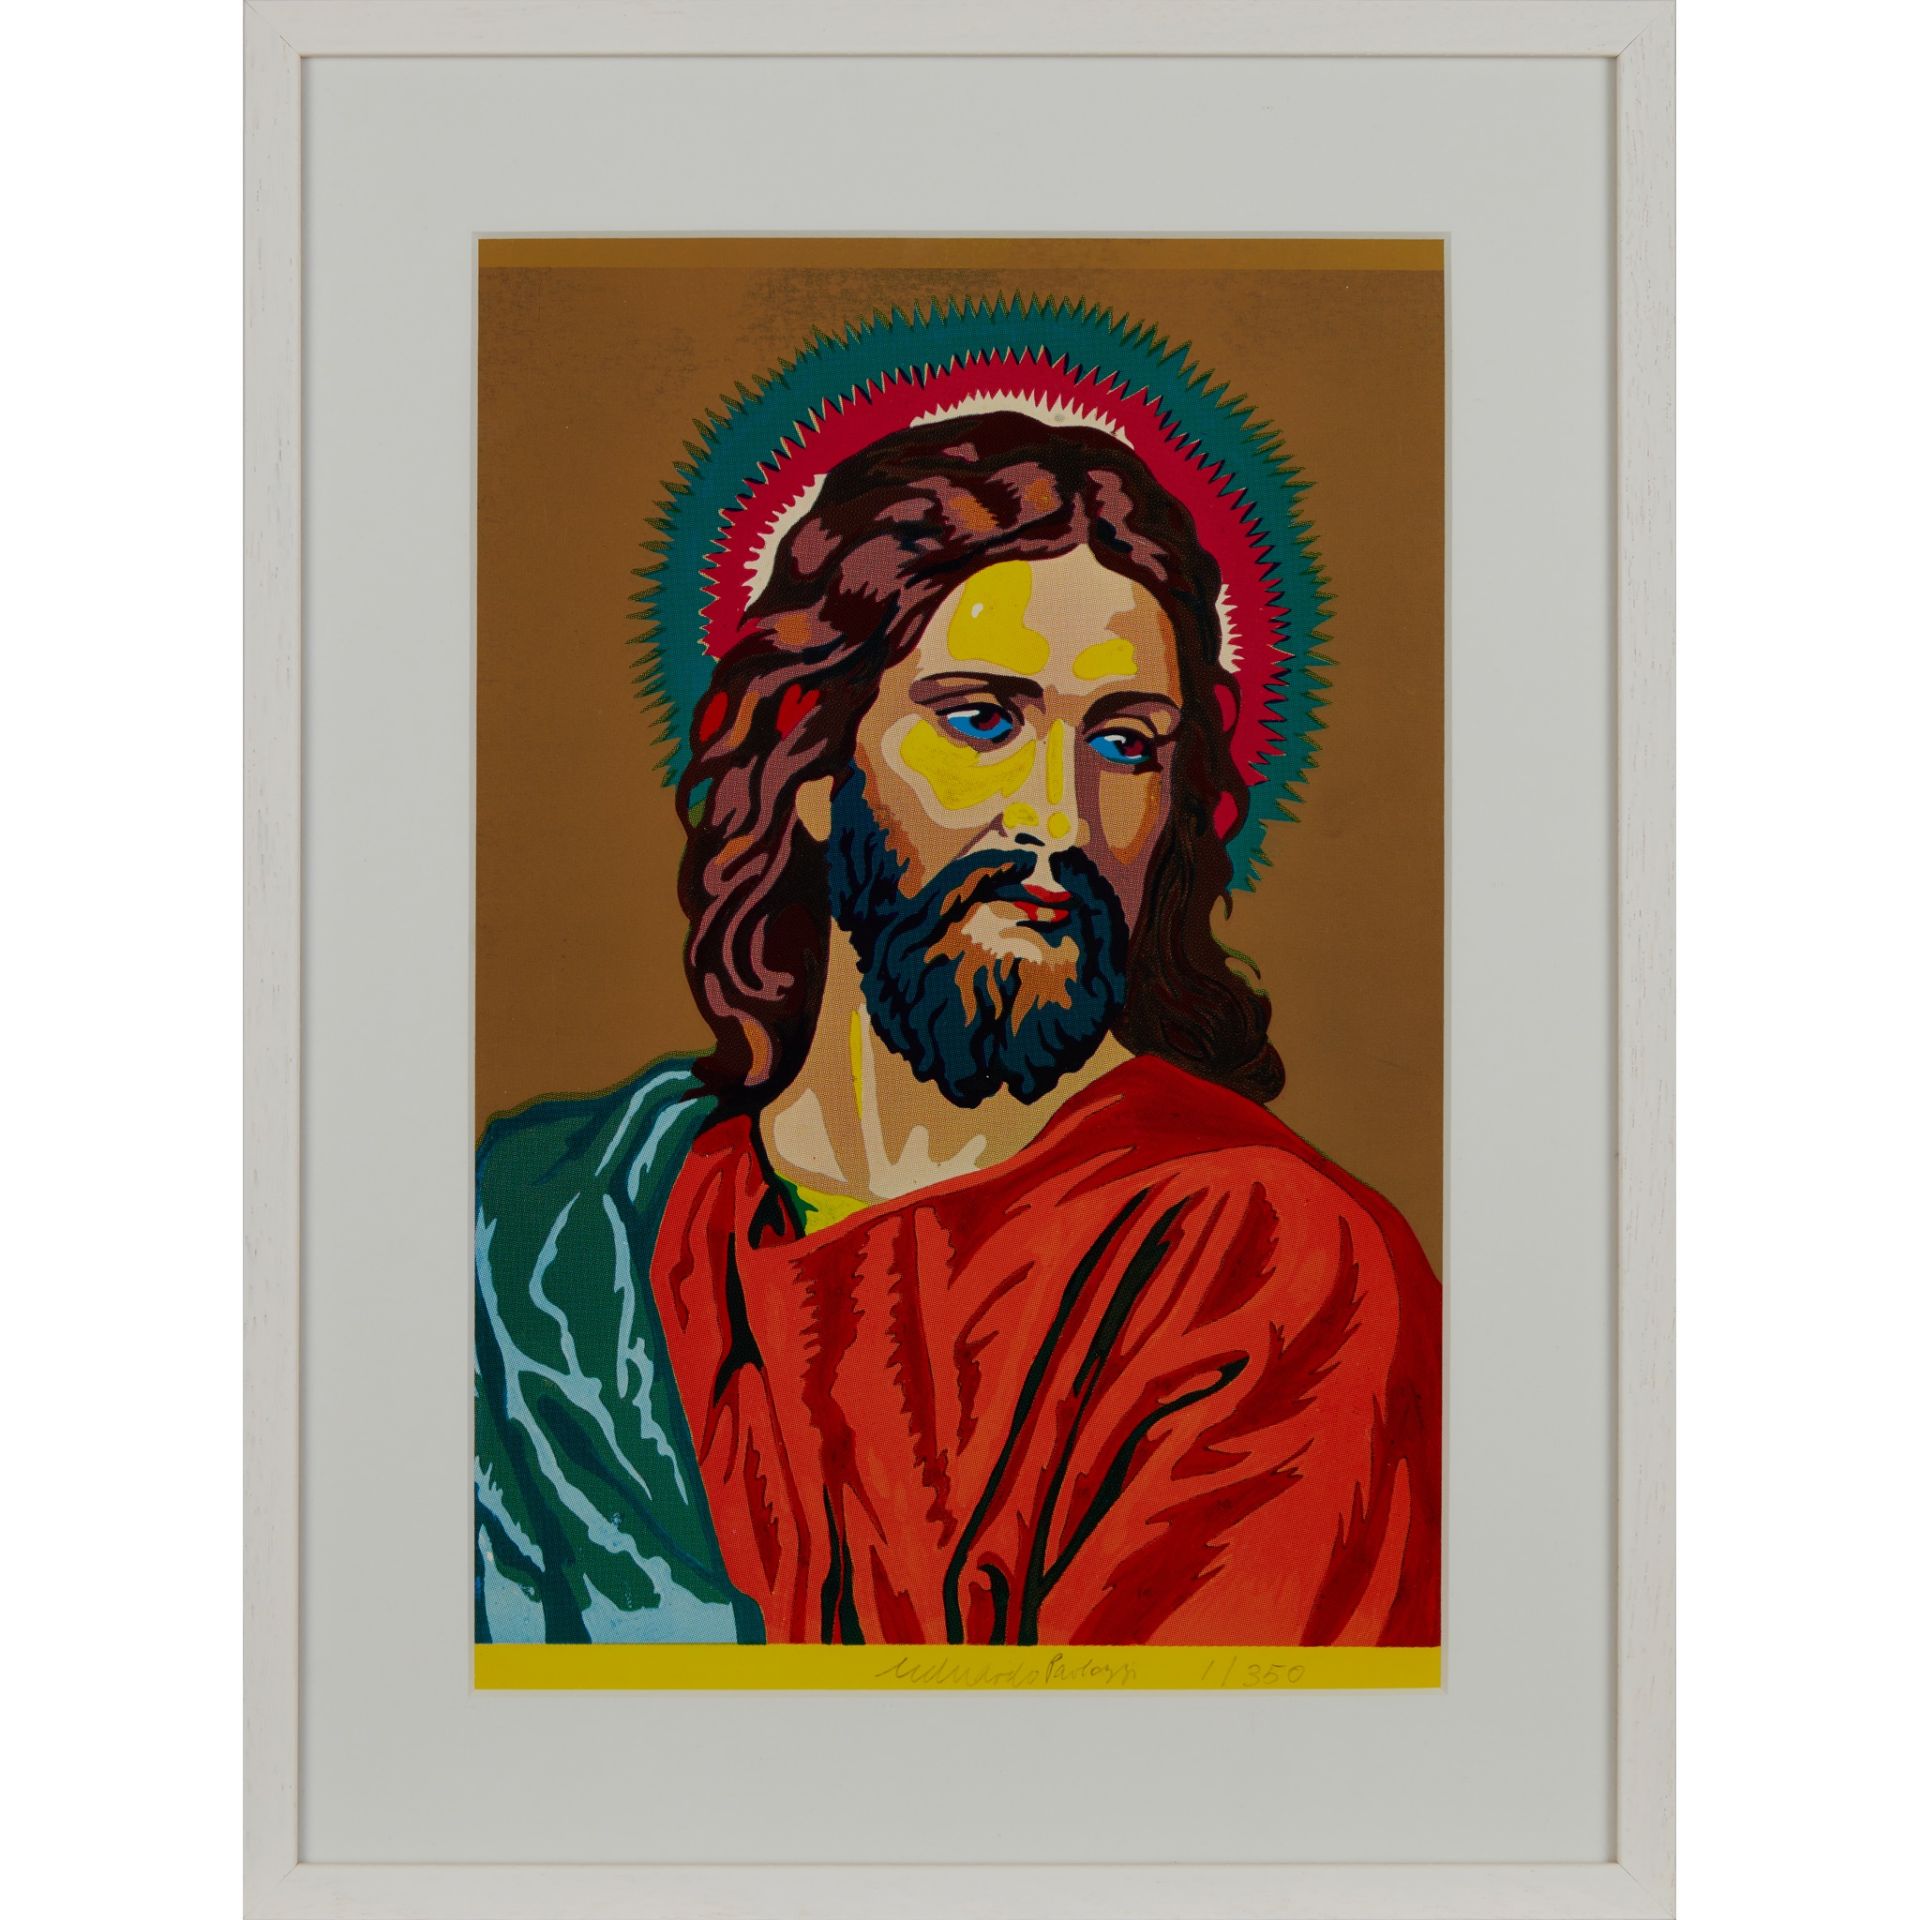 § EDUARDO PAOLOZZI K.B.E., R.A., H.R.S.A. (SCOTTISH 1924-2005) JESUS COLOUR BY NUMBERS, from - Image 3 of 6